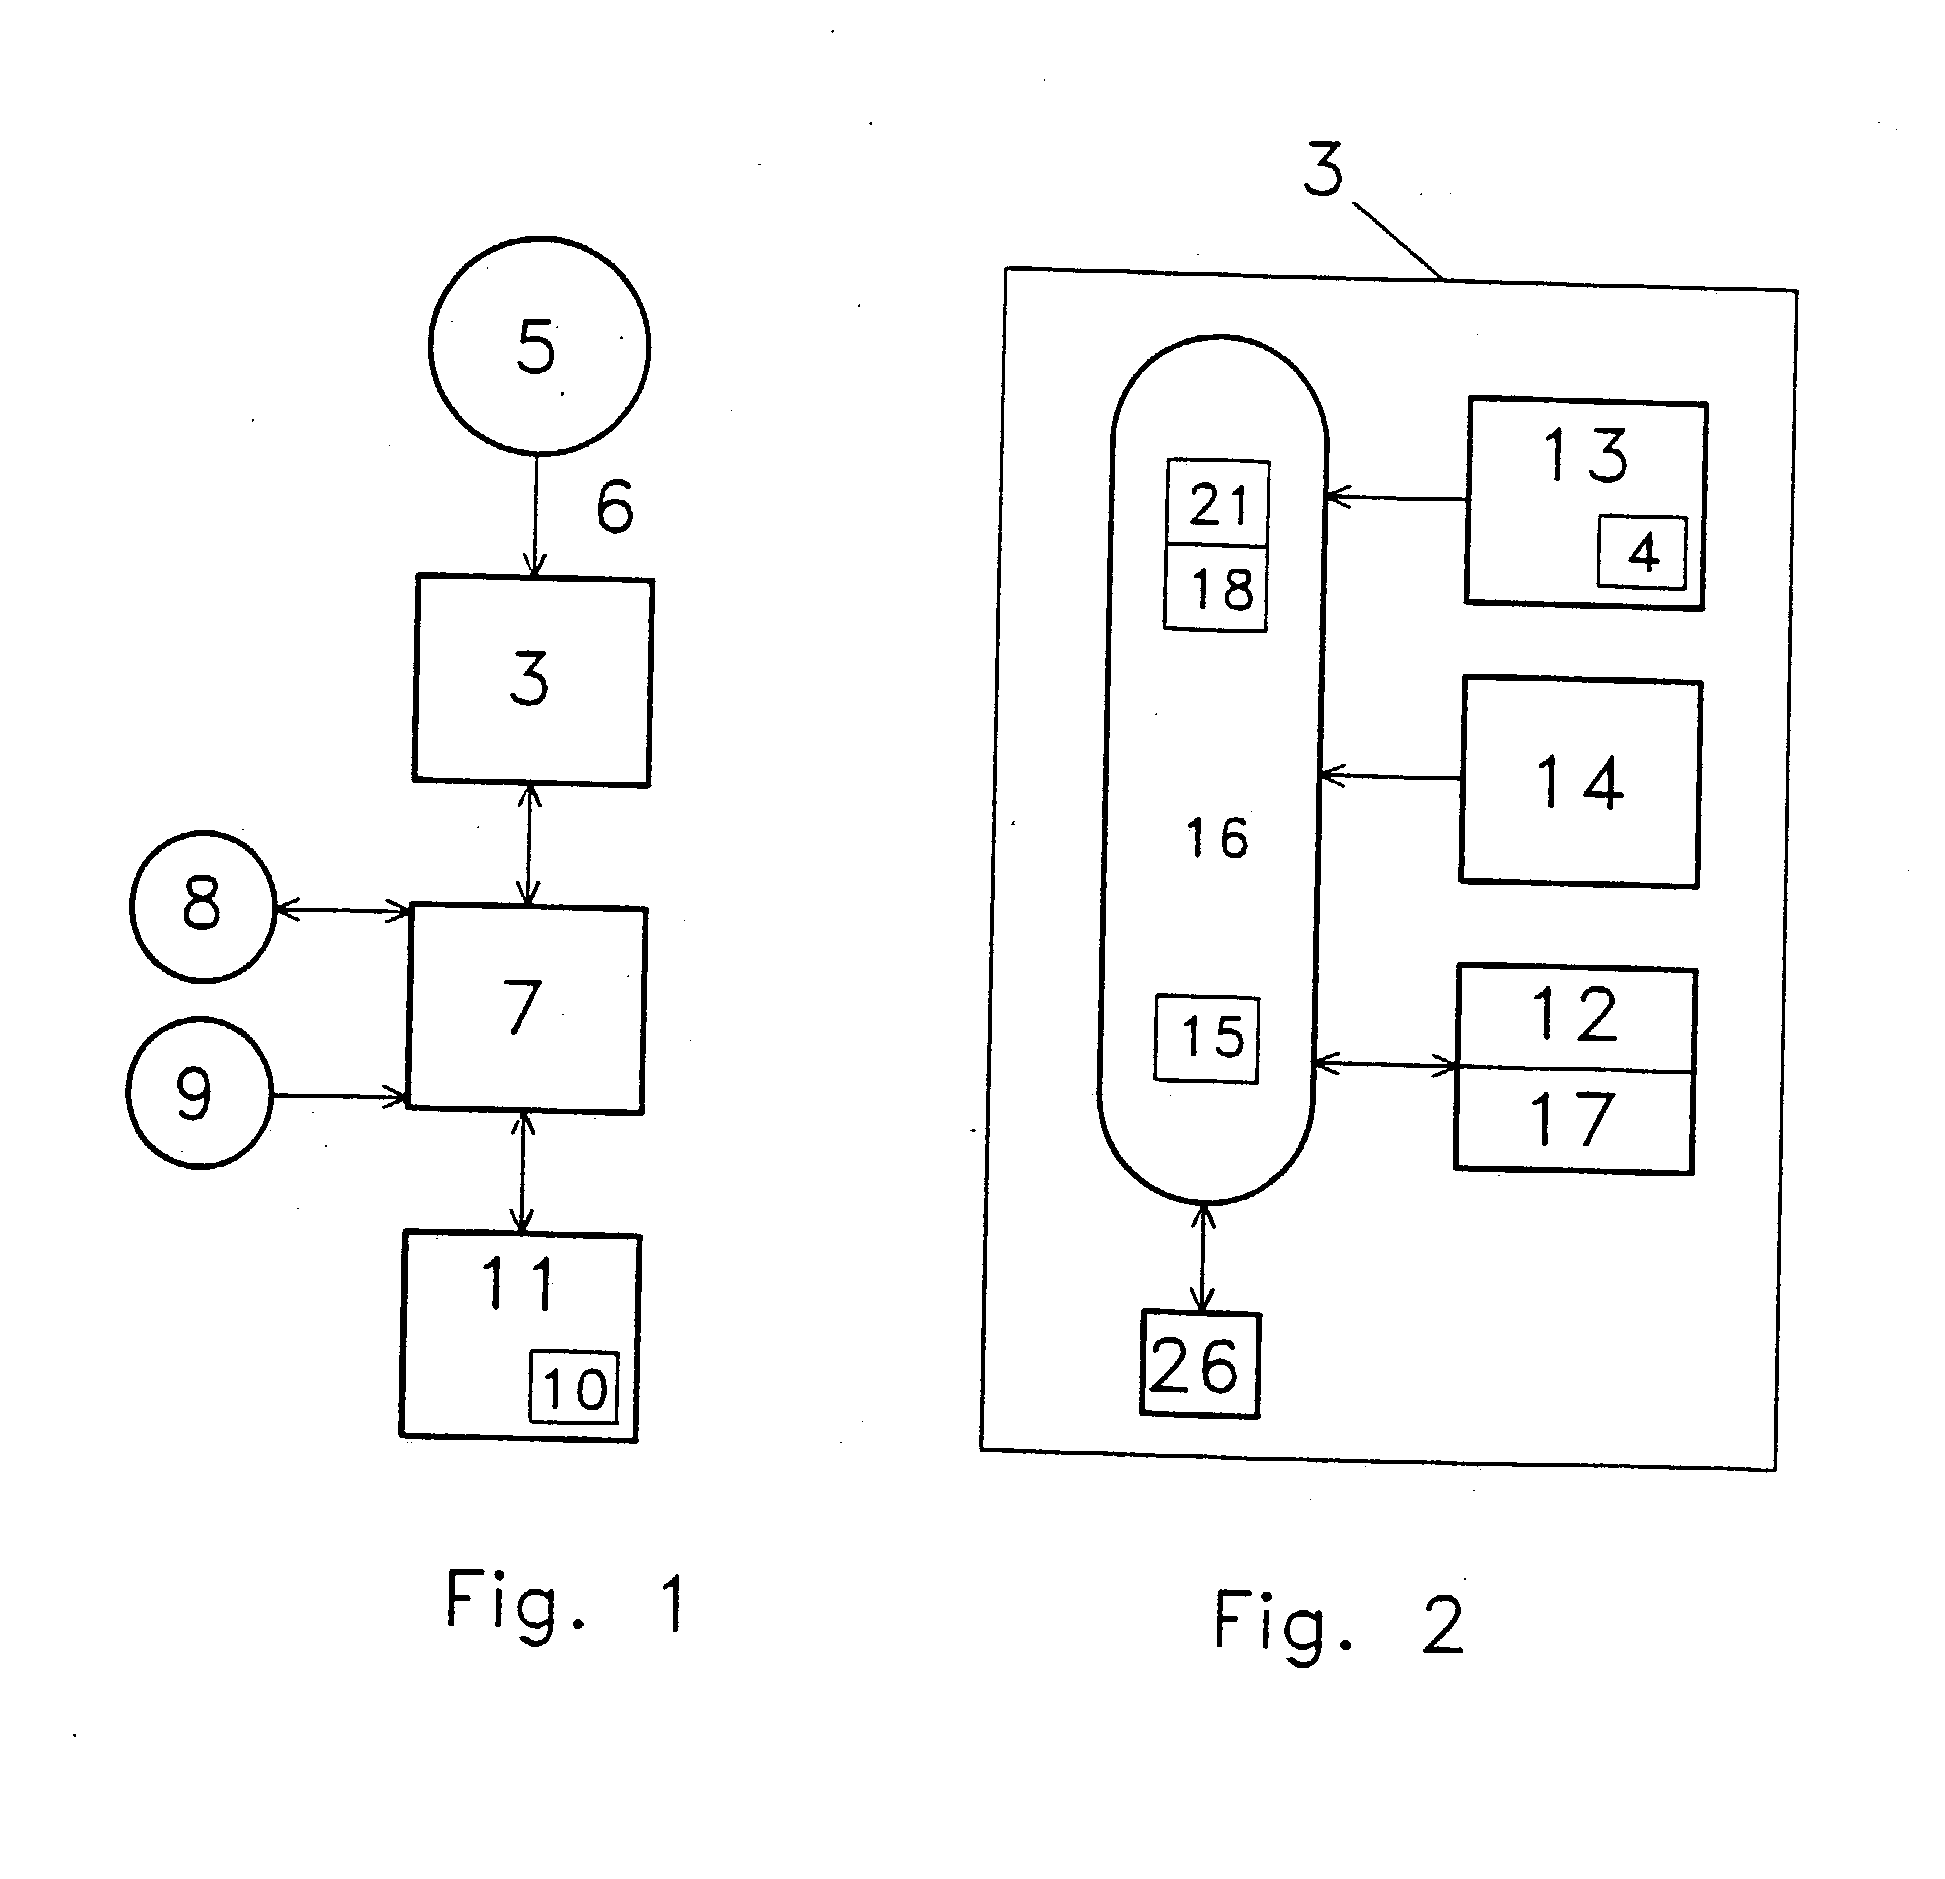 System for the creation of database and structured information from verbal input